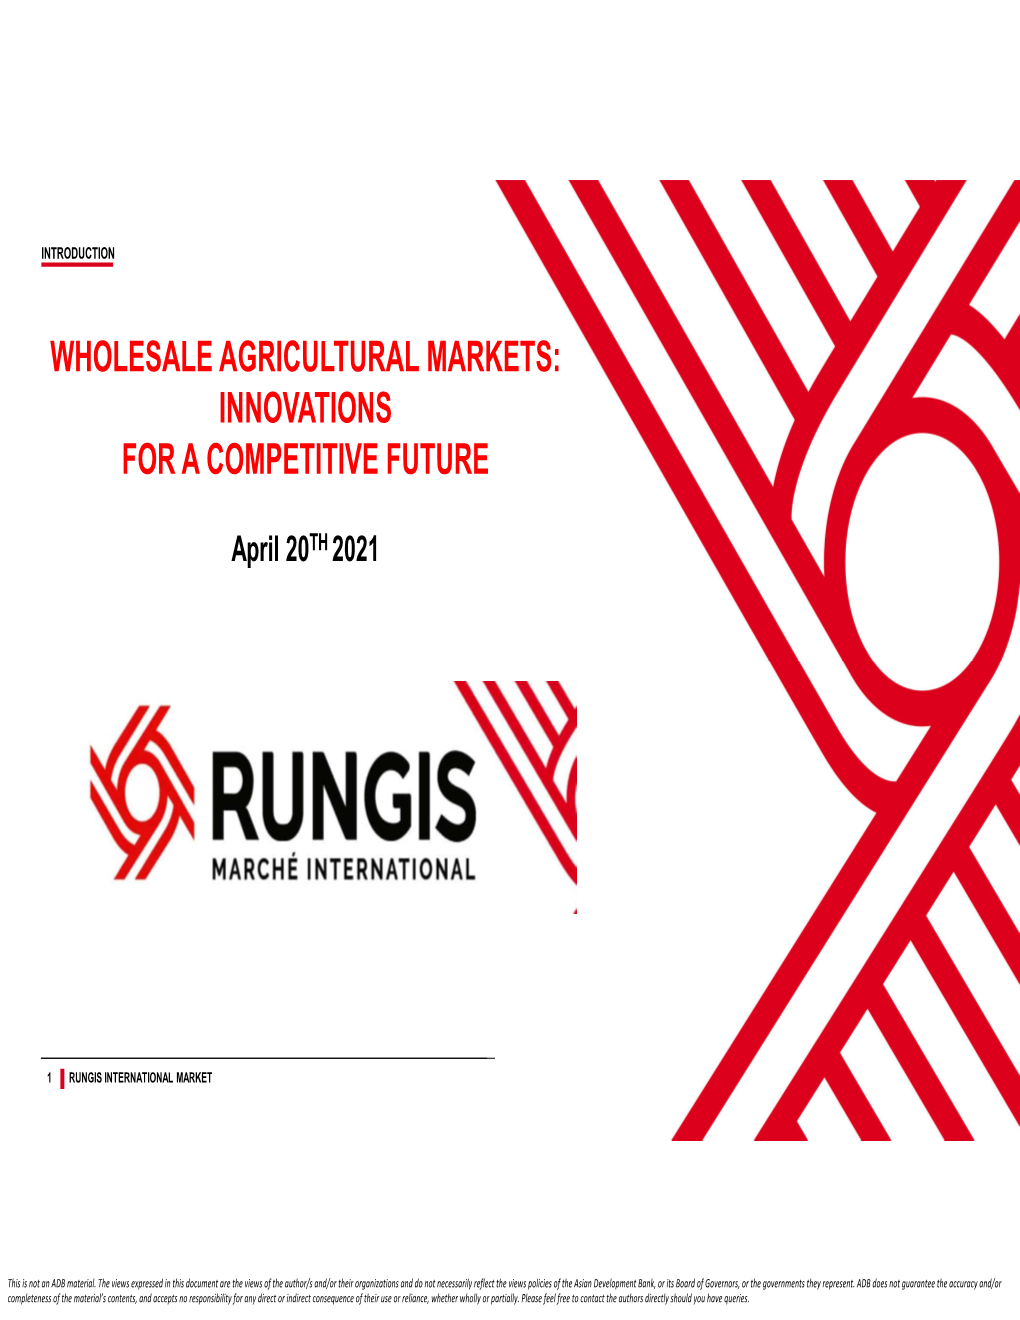 Wholesale Agricultural Markets: Innovations for a Competitive Future